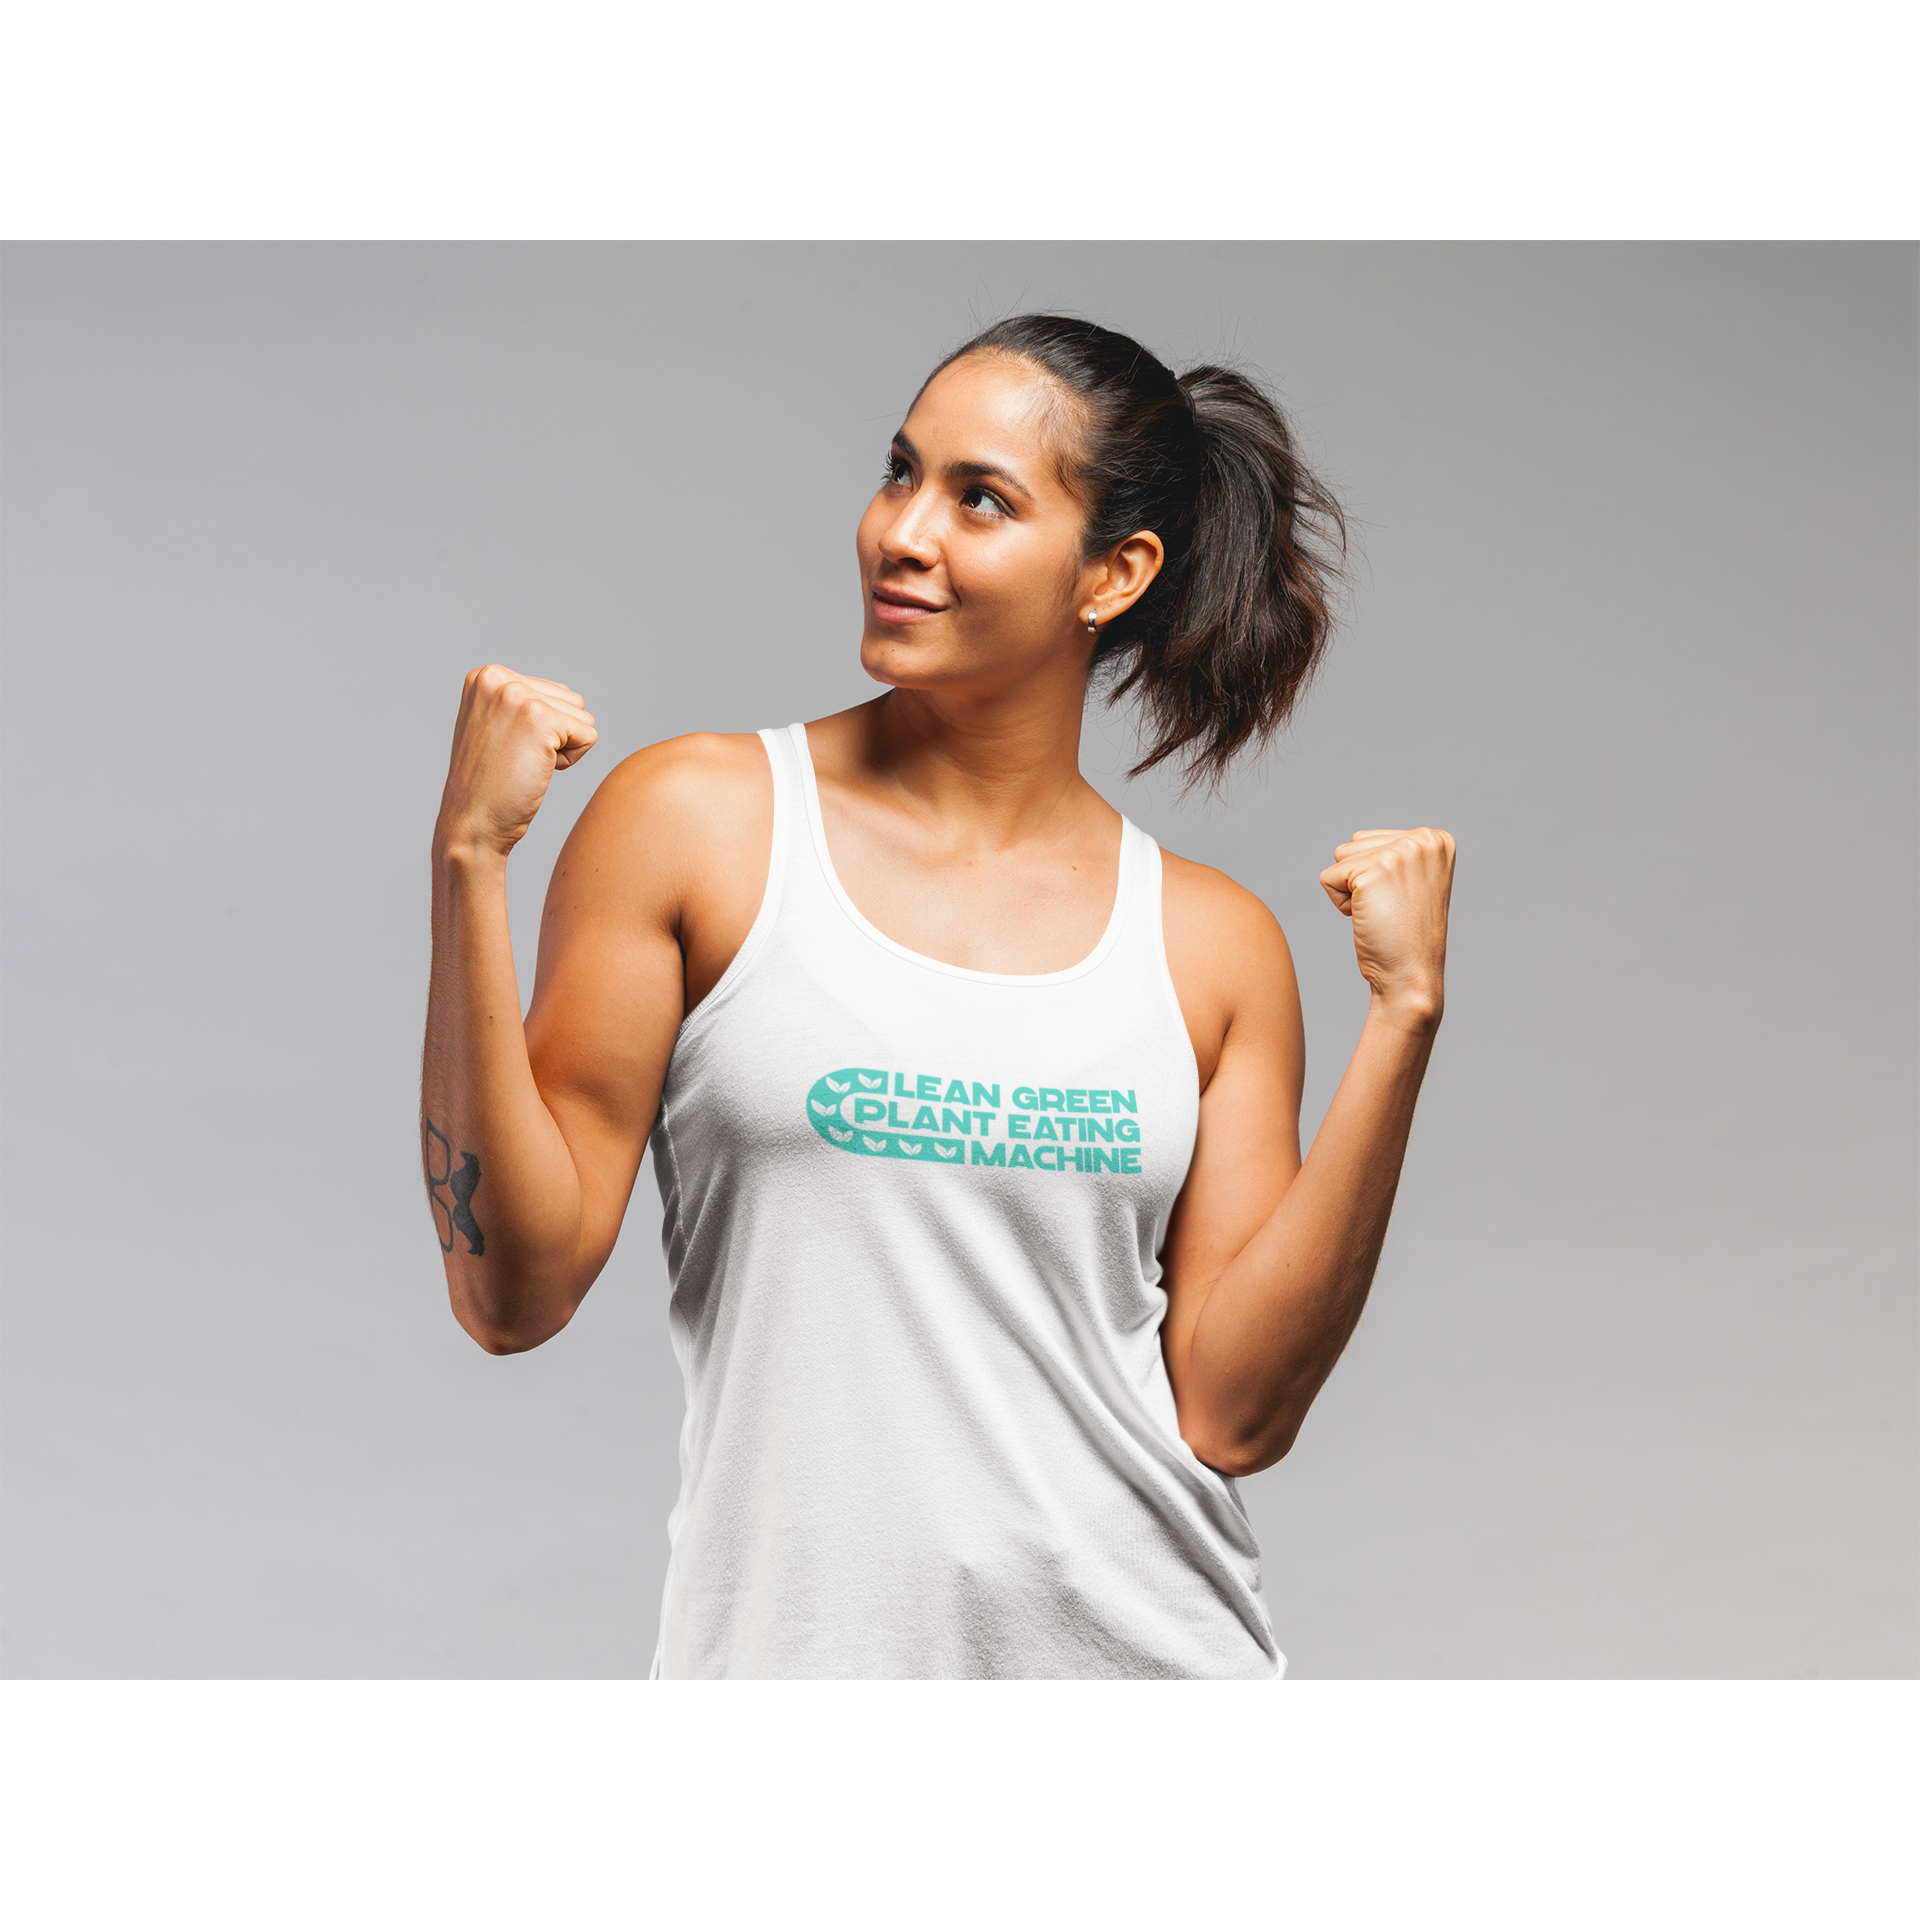 Lean green plant eating machine design in teal on a white premium vegan tank top worn by a woman flexing her biceps